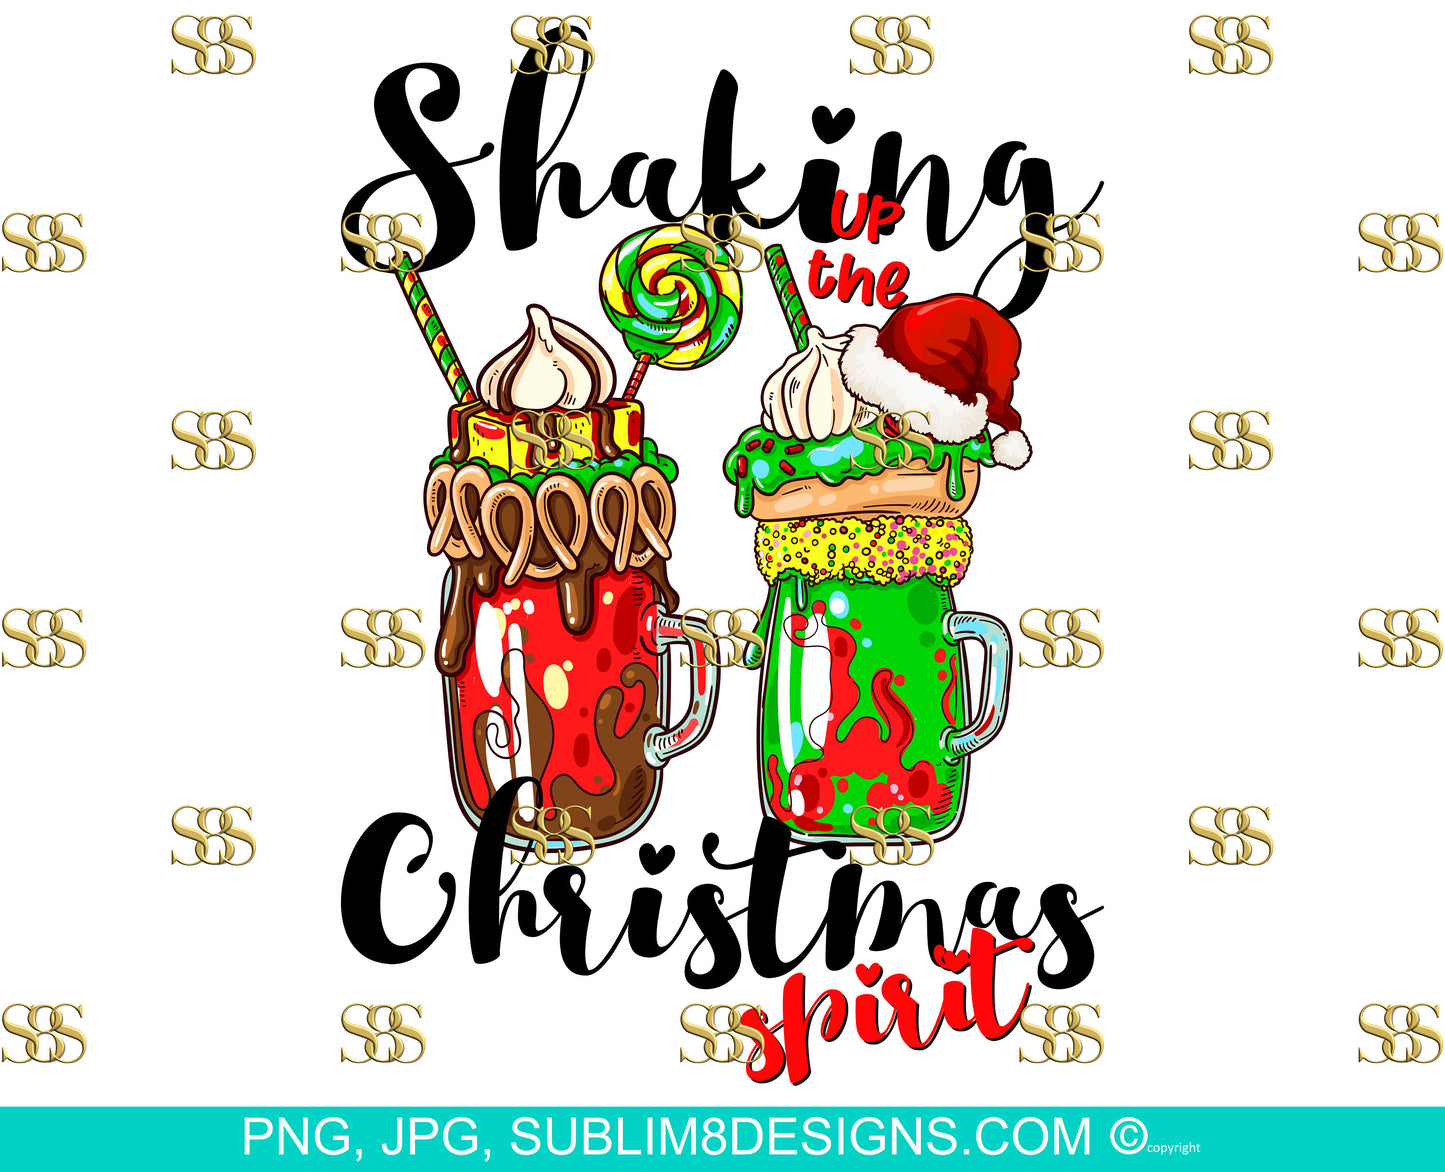 Shaking Up The Christmas Spirit | Christmas Shakes | Christmas Design | Christmas Spirit | Sublimation Design PNG and JPG ONLY